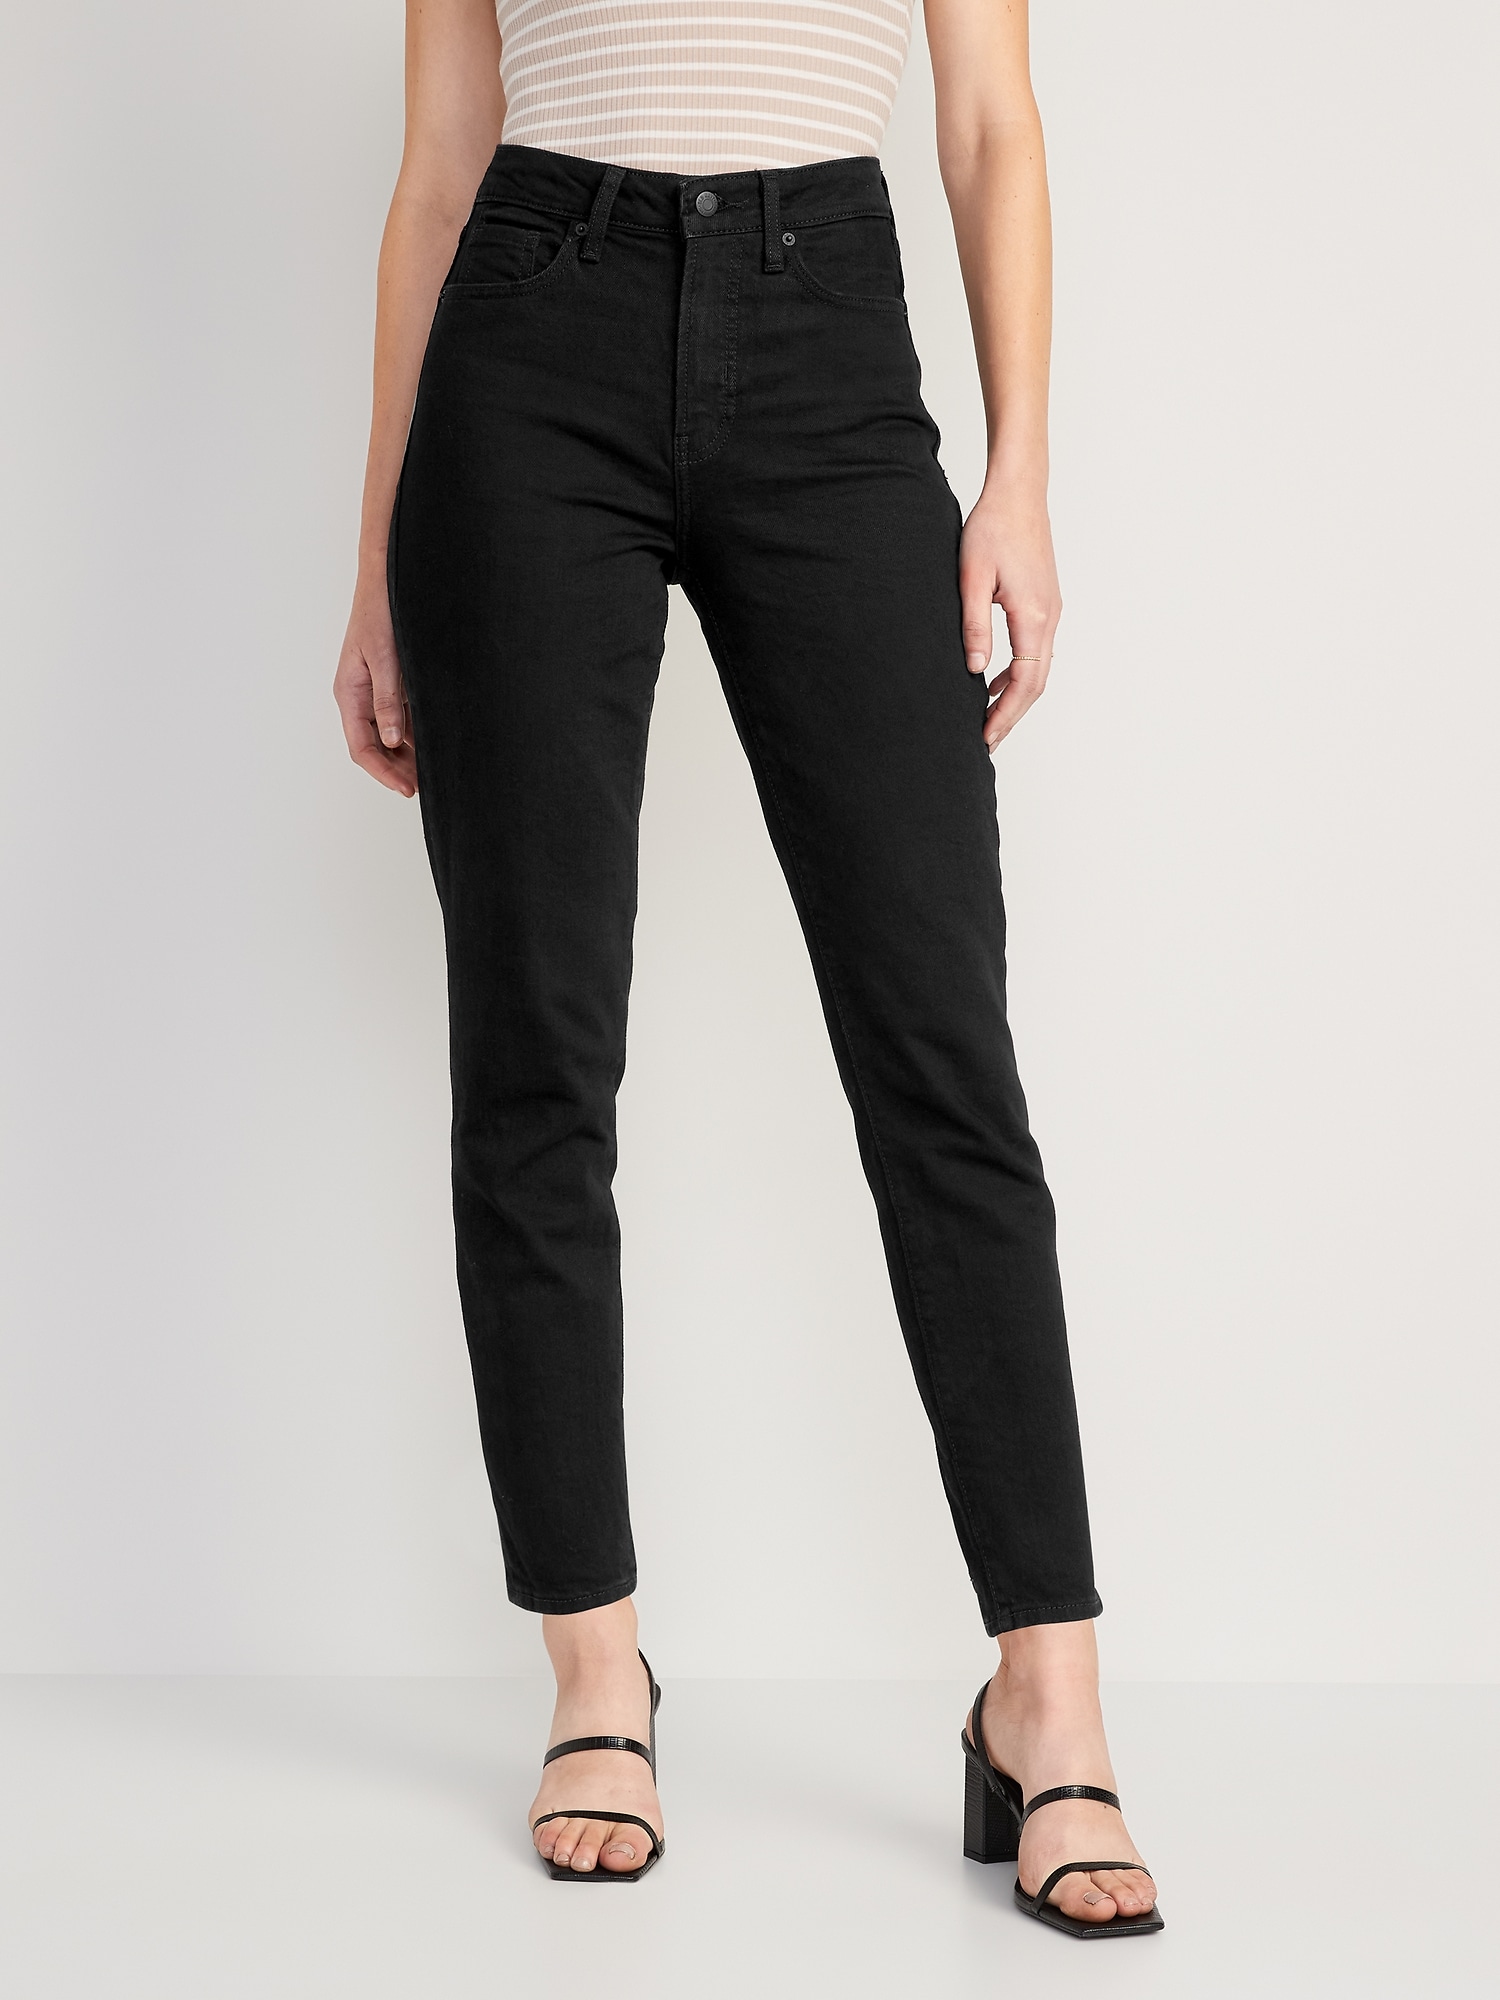 Women's High-Waisted Jeans